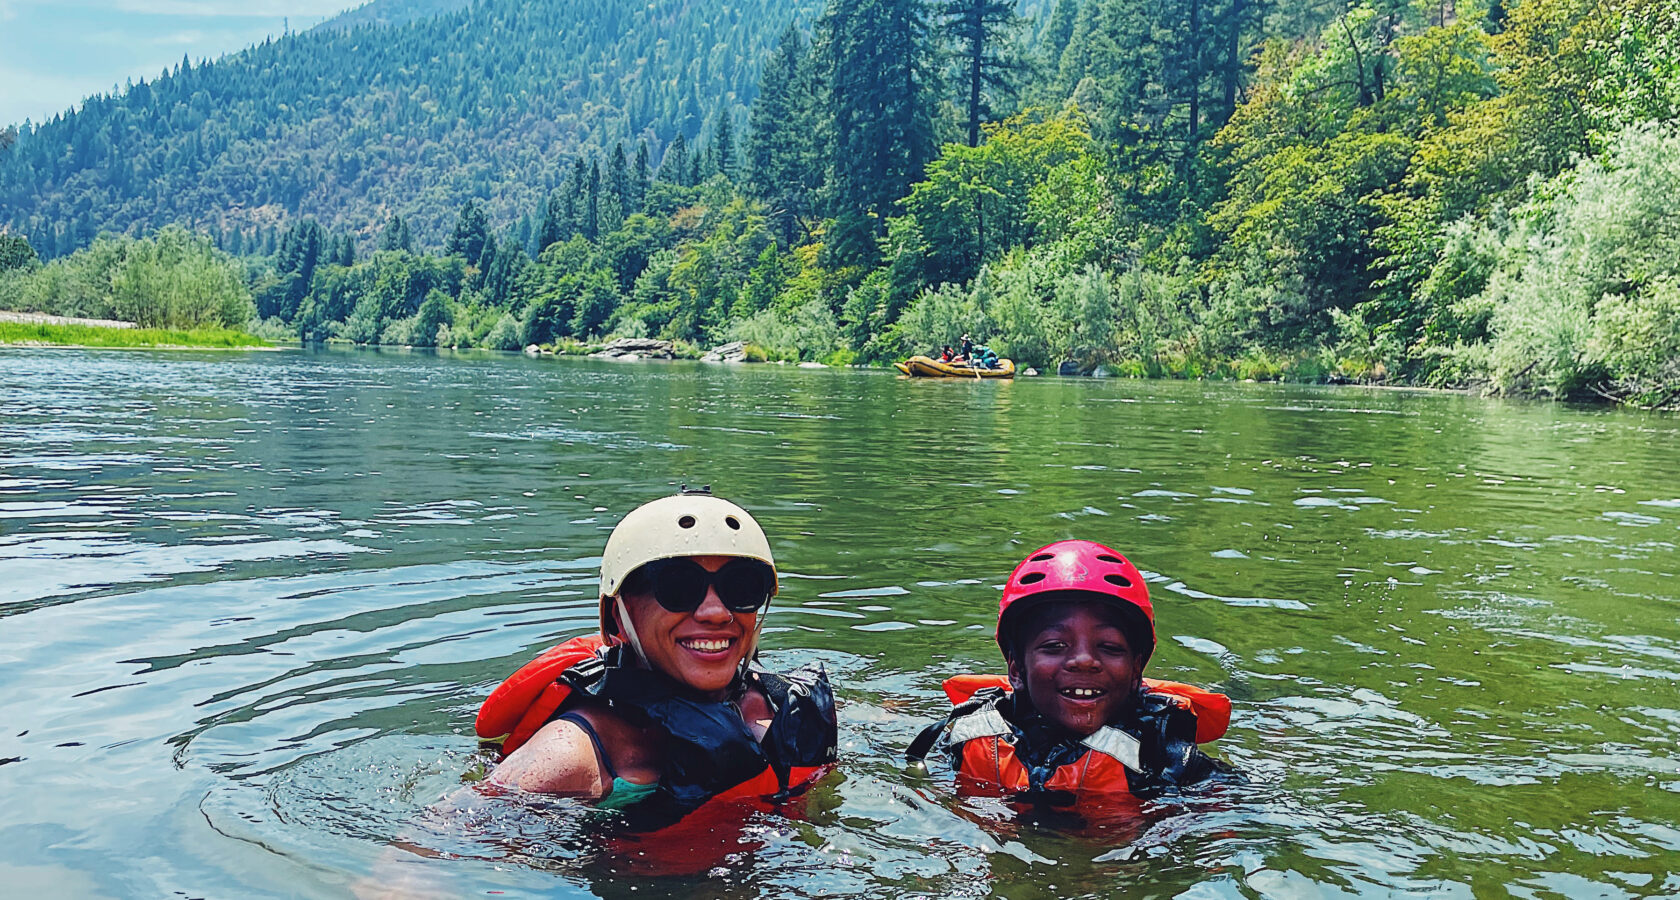 From the Pacific Northwest to the River Wild: Lessons from the Klamath River